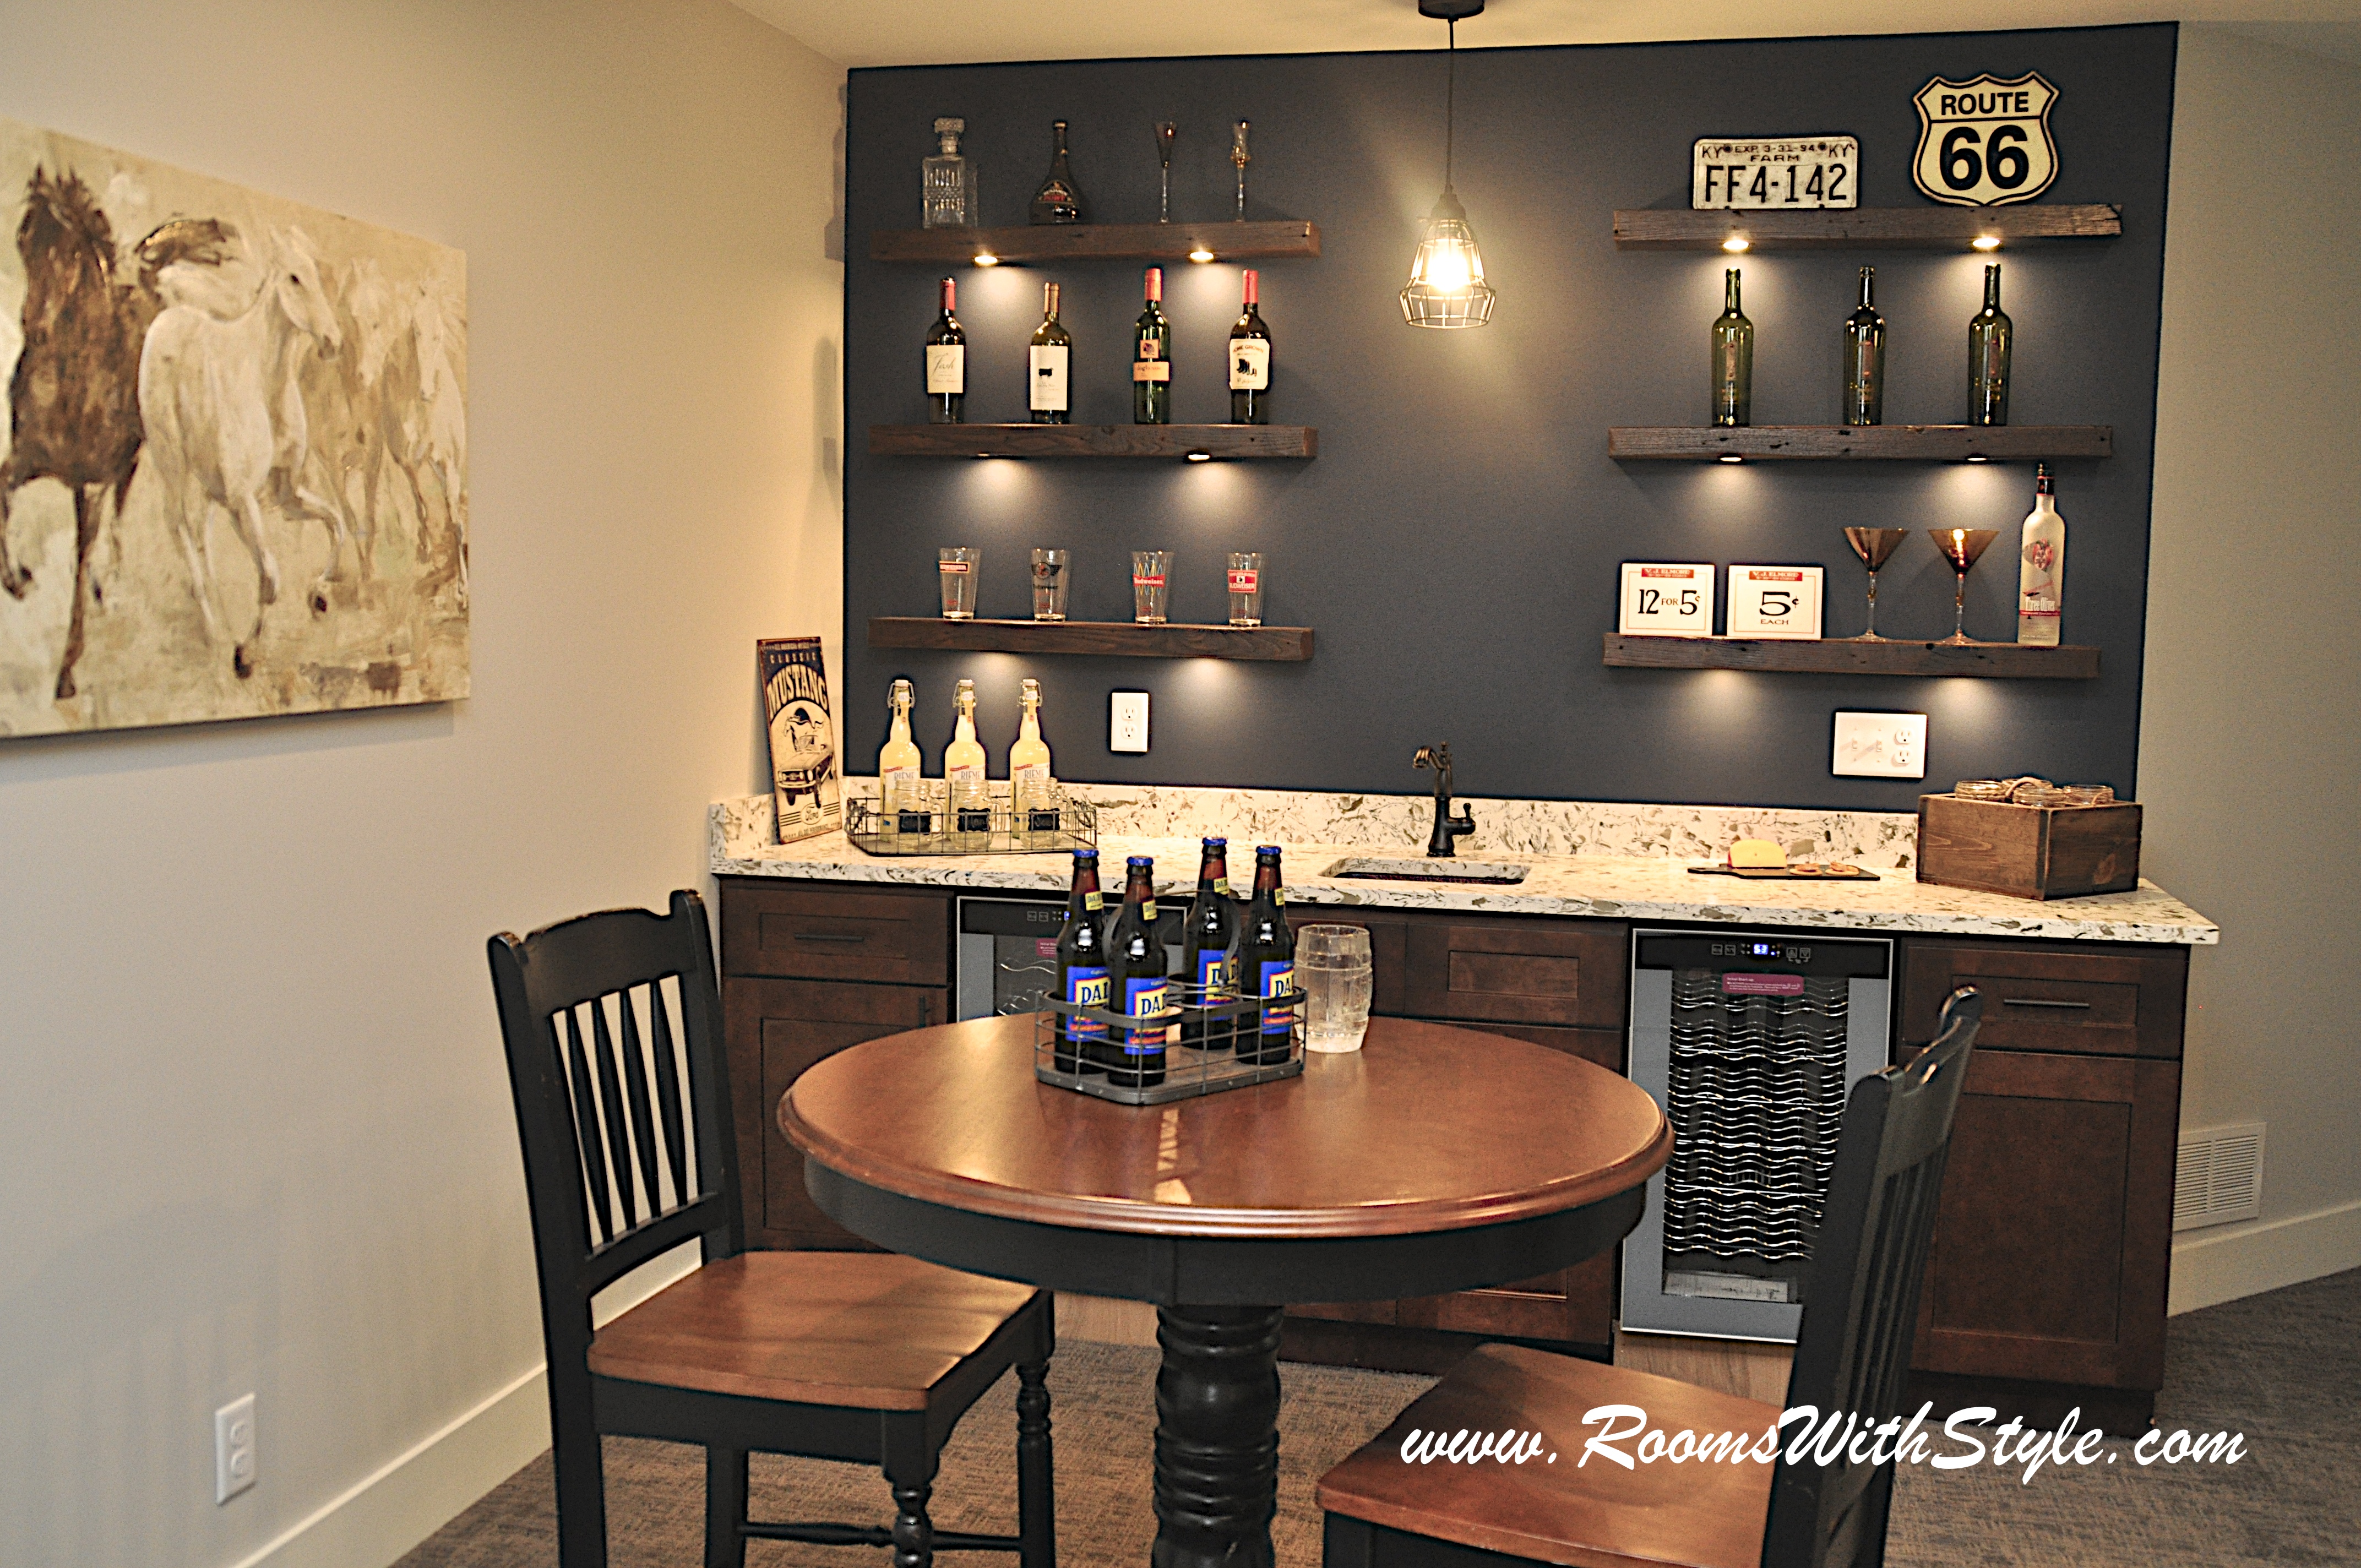 what you think floating shelves homesmsp above bar the still allow plenty storage area display fun glasses bottles wine and couple eclectic accent pieces selected for this wall